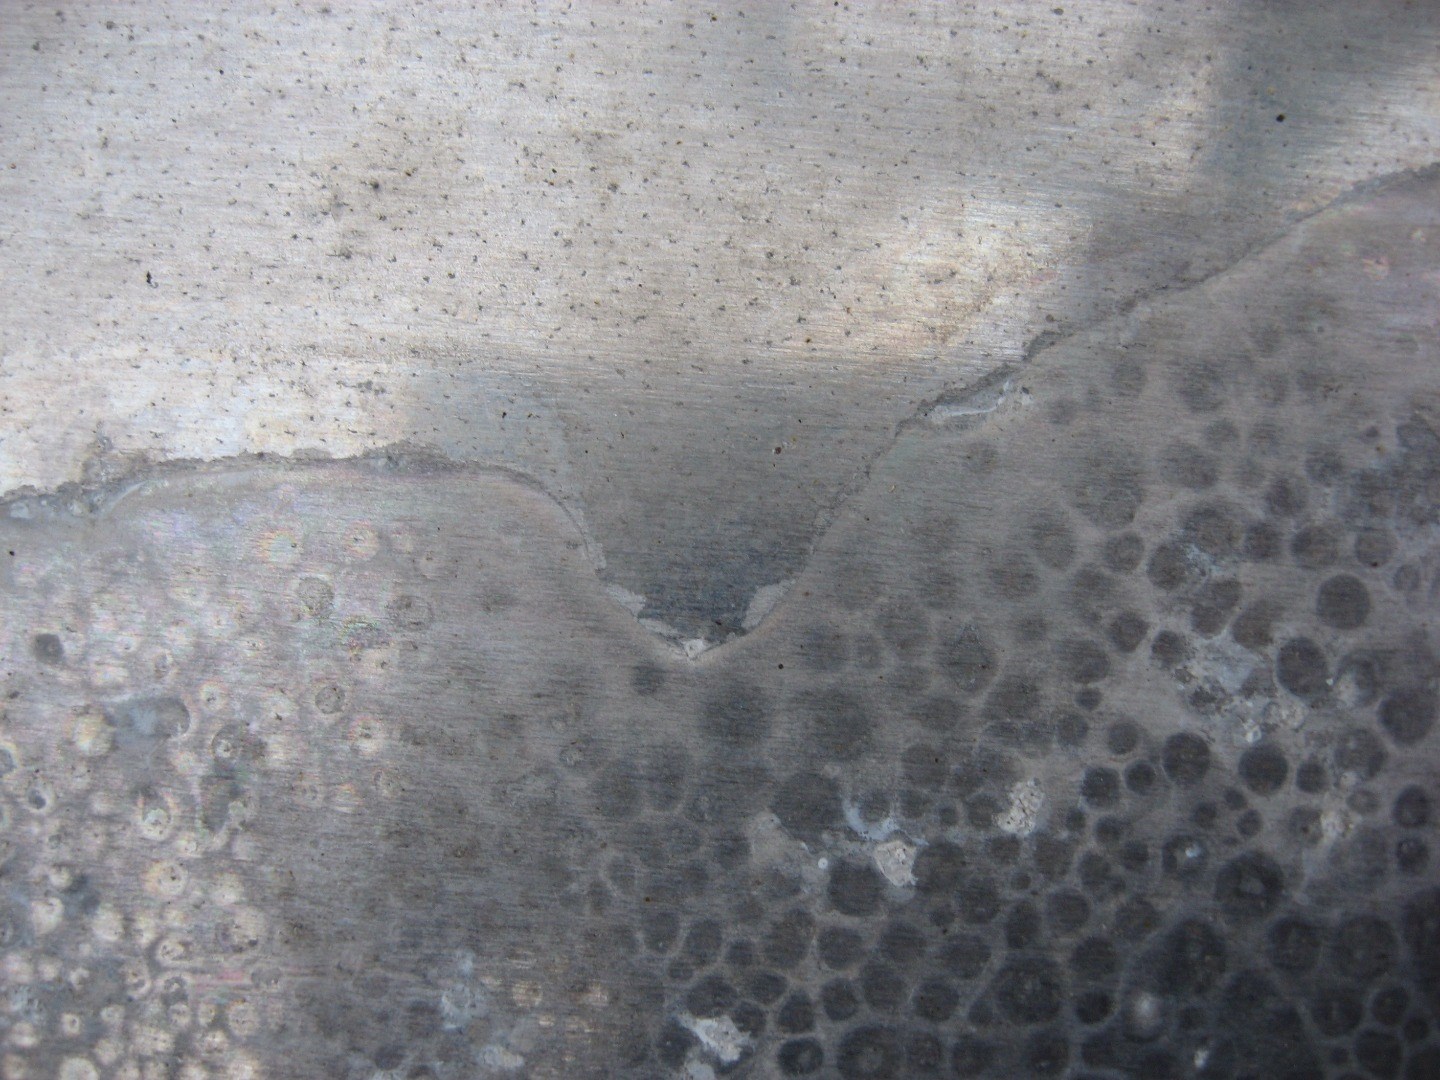 Surface Corrosion